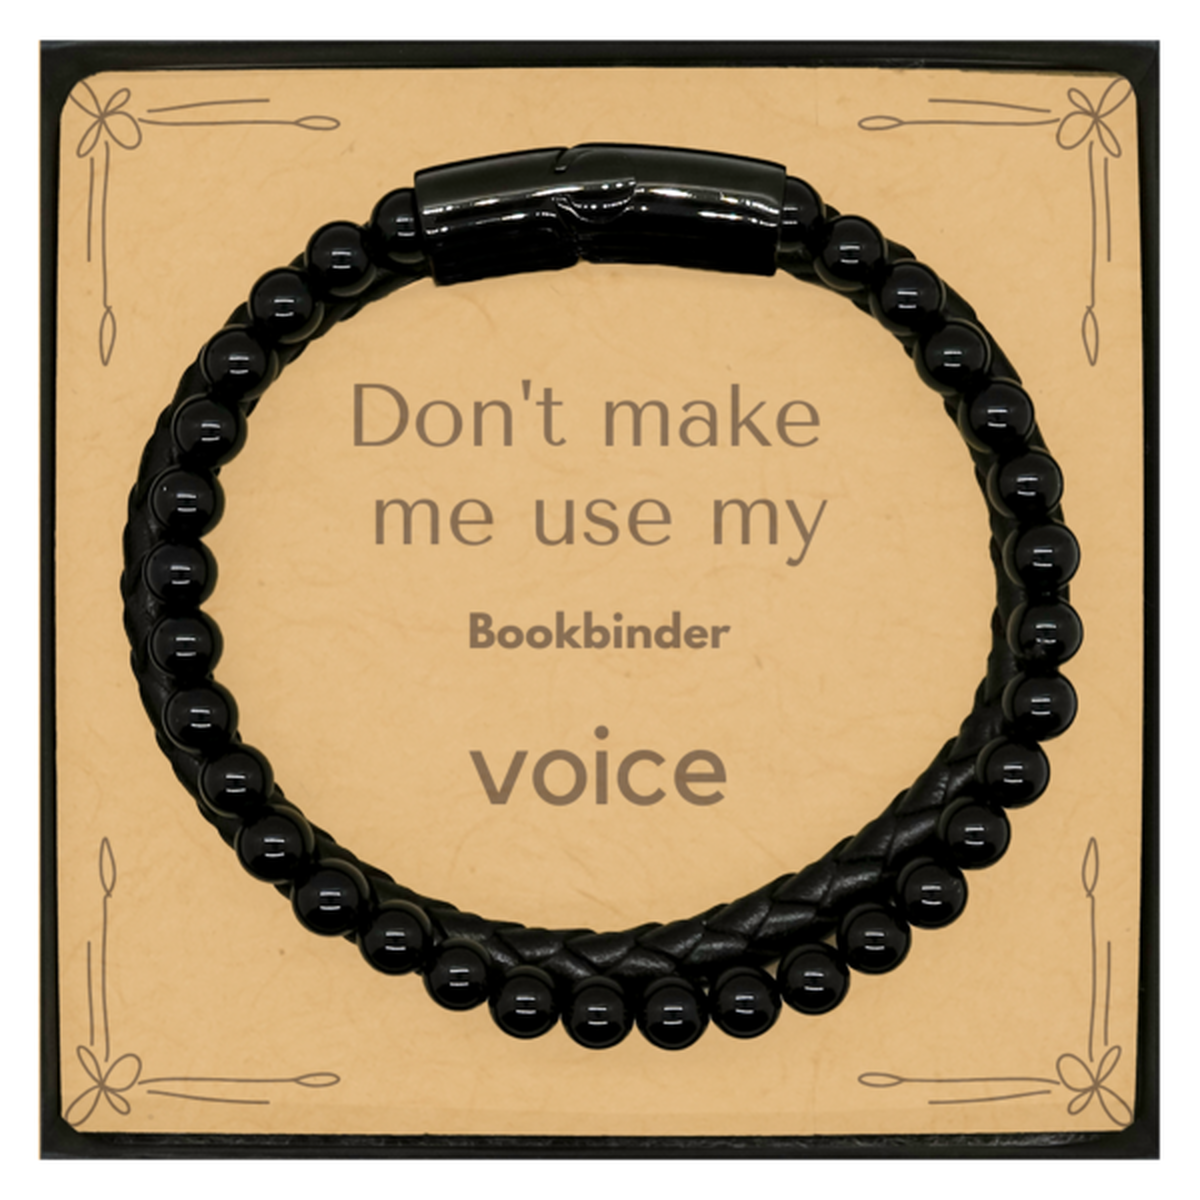 Don't make me use my Bookbinder voice, Sarcasm Bookbinder Card Gifts, Christmas Bookbinder Stone Leather Bracelets Birthday Unique Gifts For Bookbinder Coworkers, Men, Women, Colleague, Friends